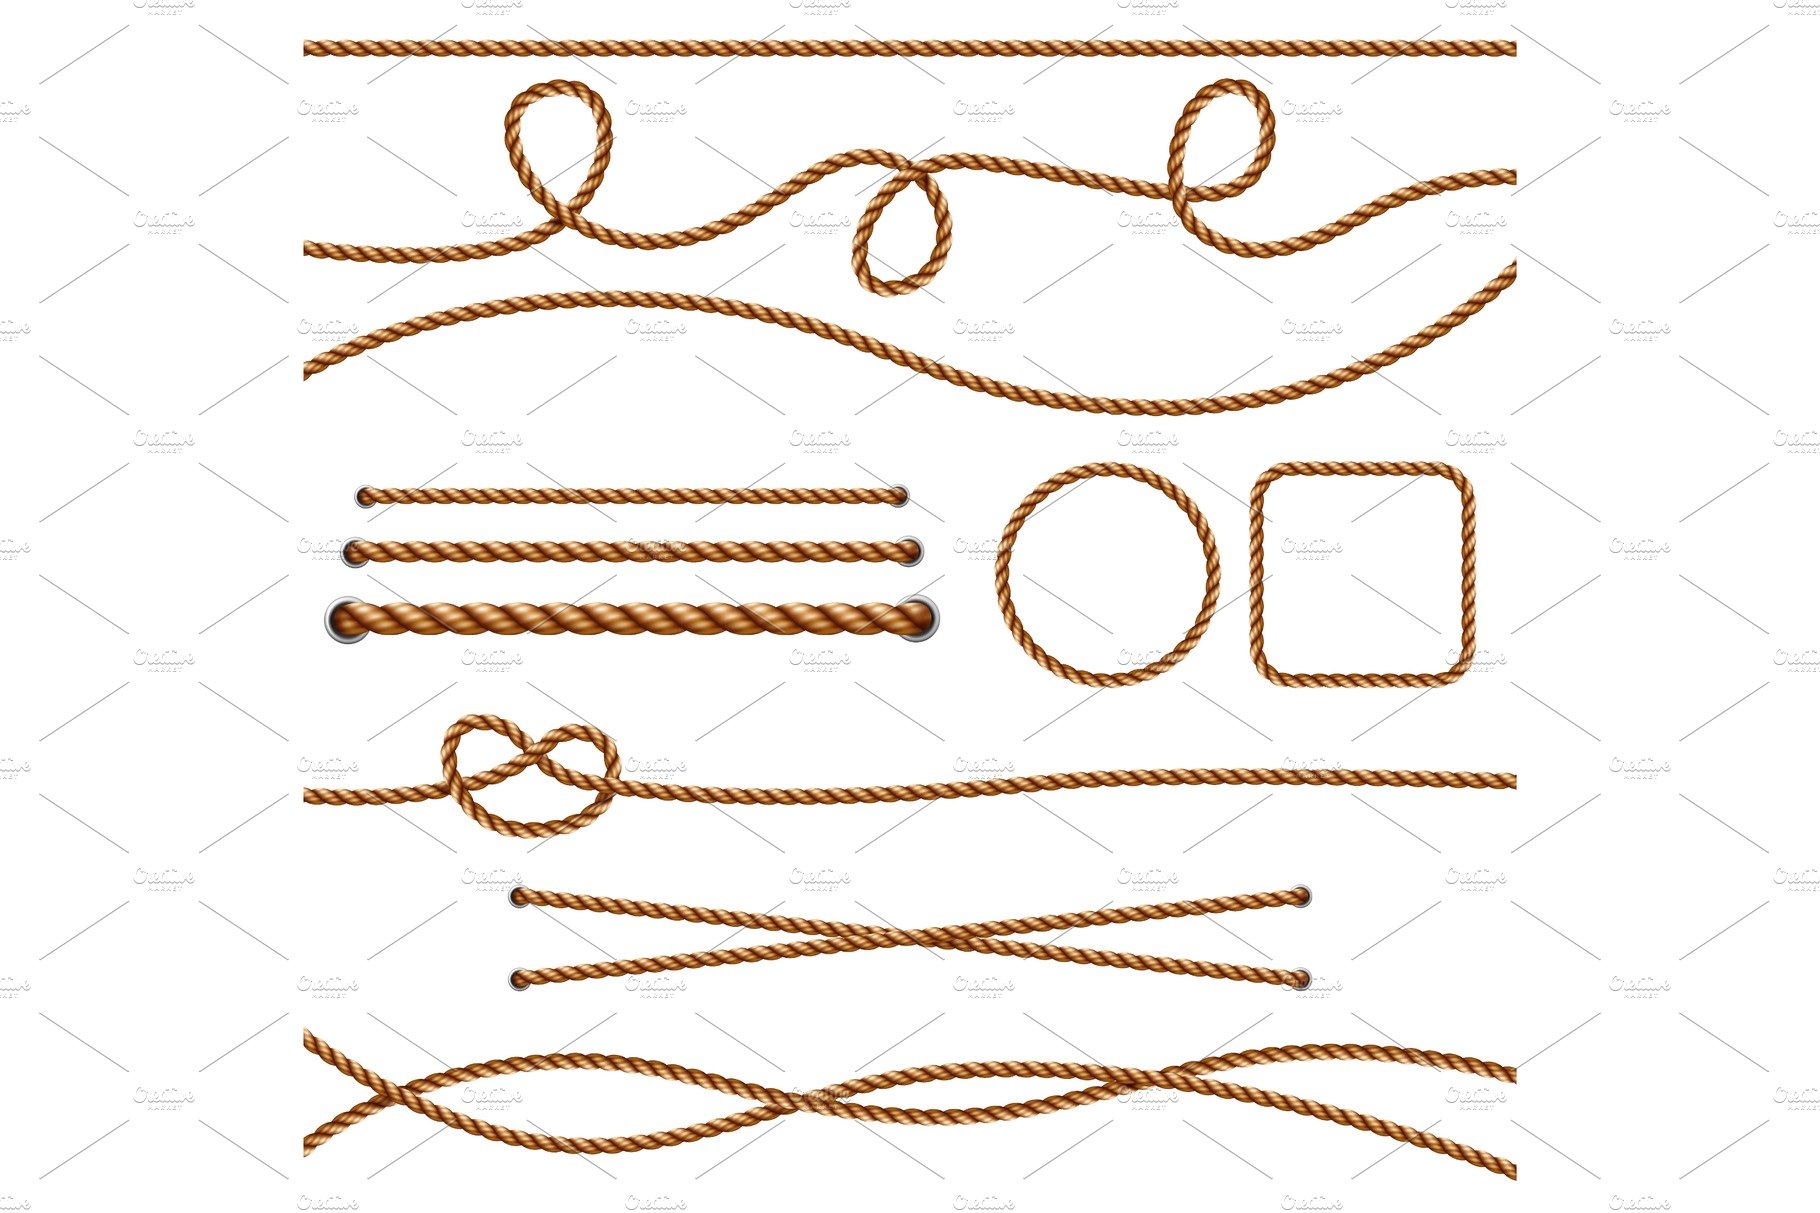 Fiber ropes. Straight brown cover image.